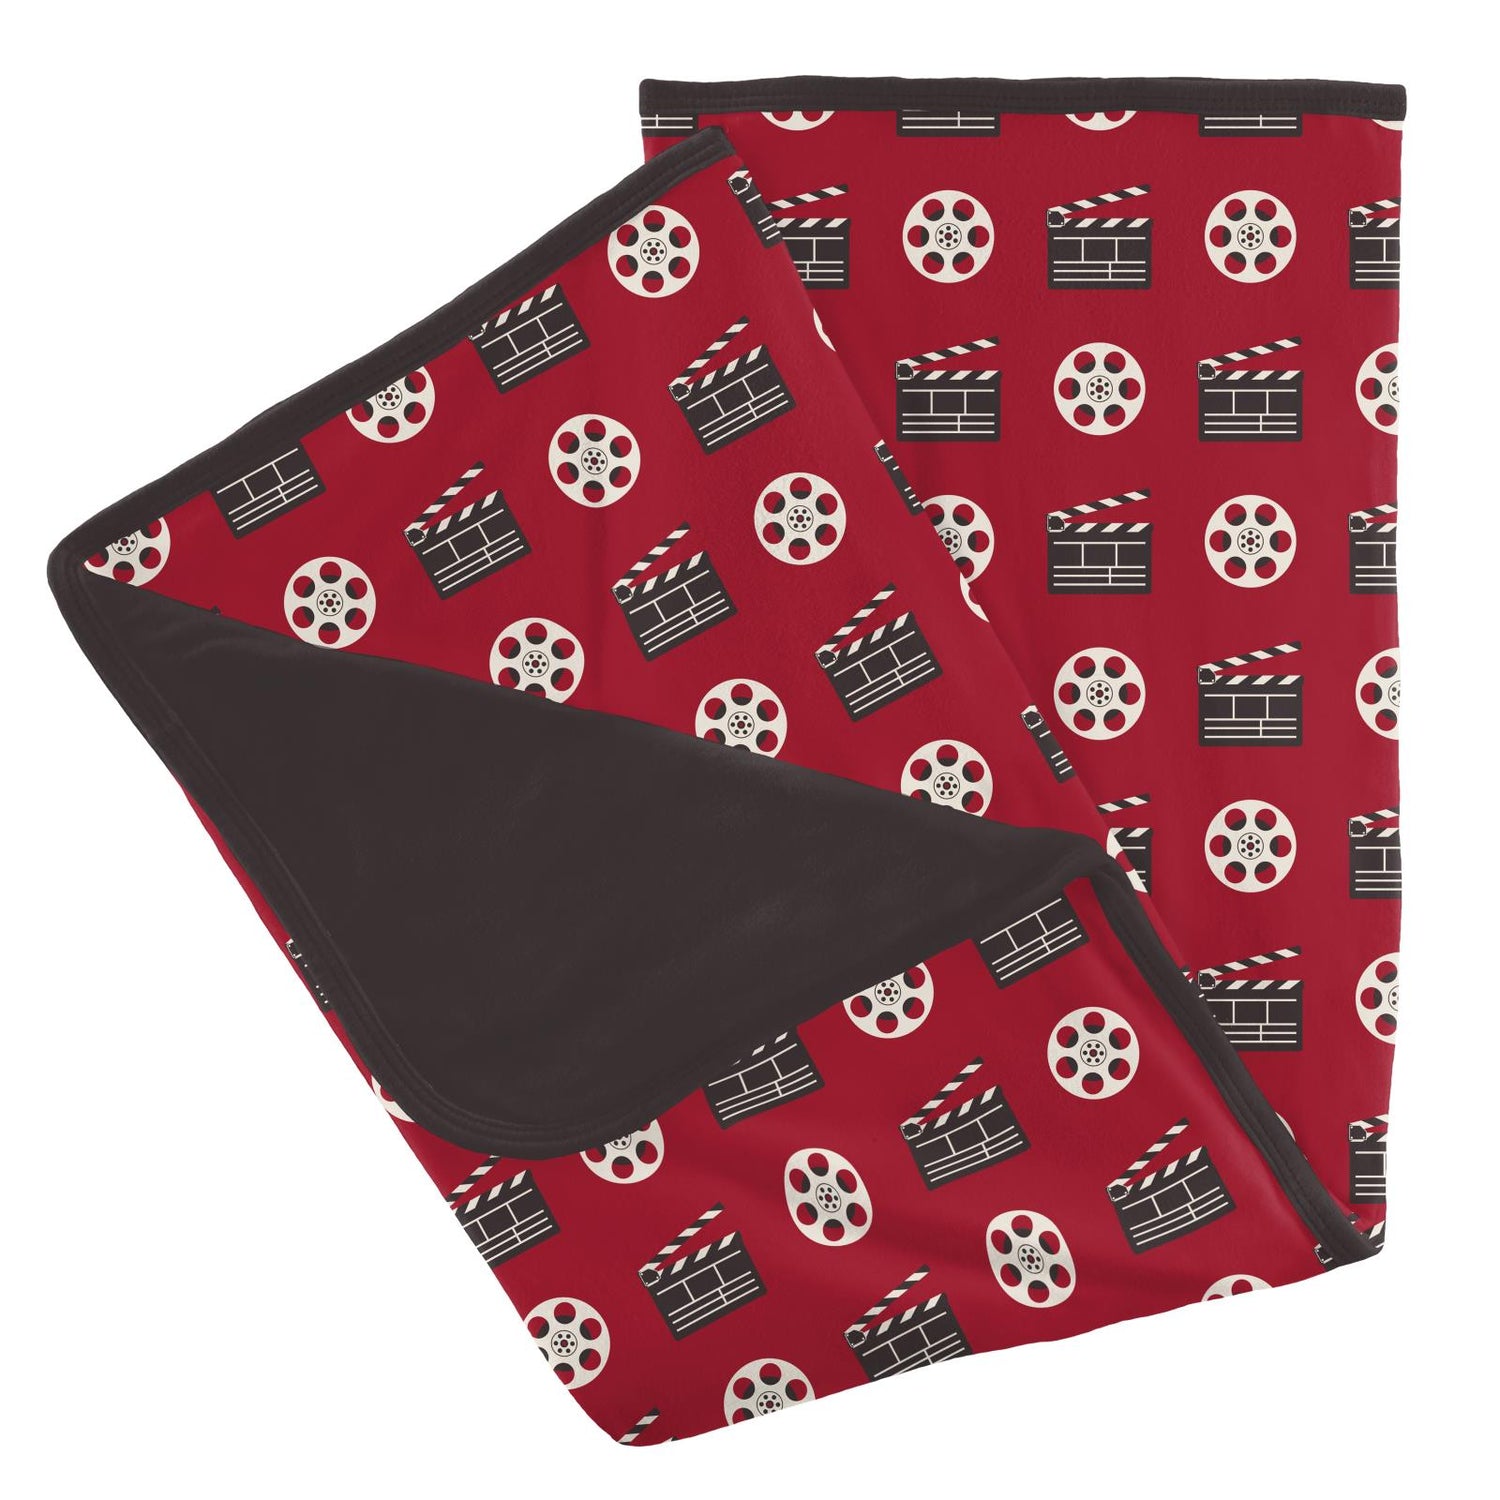 Print Stroller Blanket in Candy Apple Clapper Board and Film